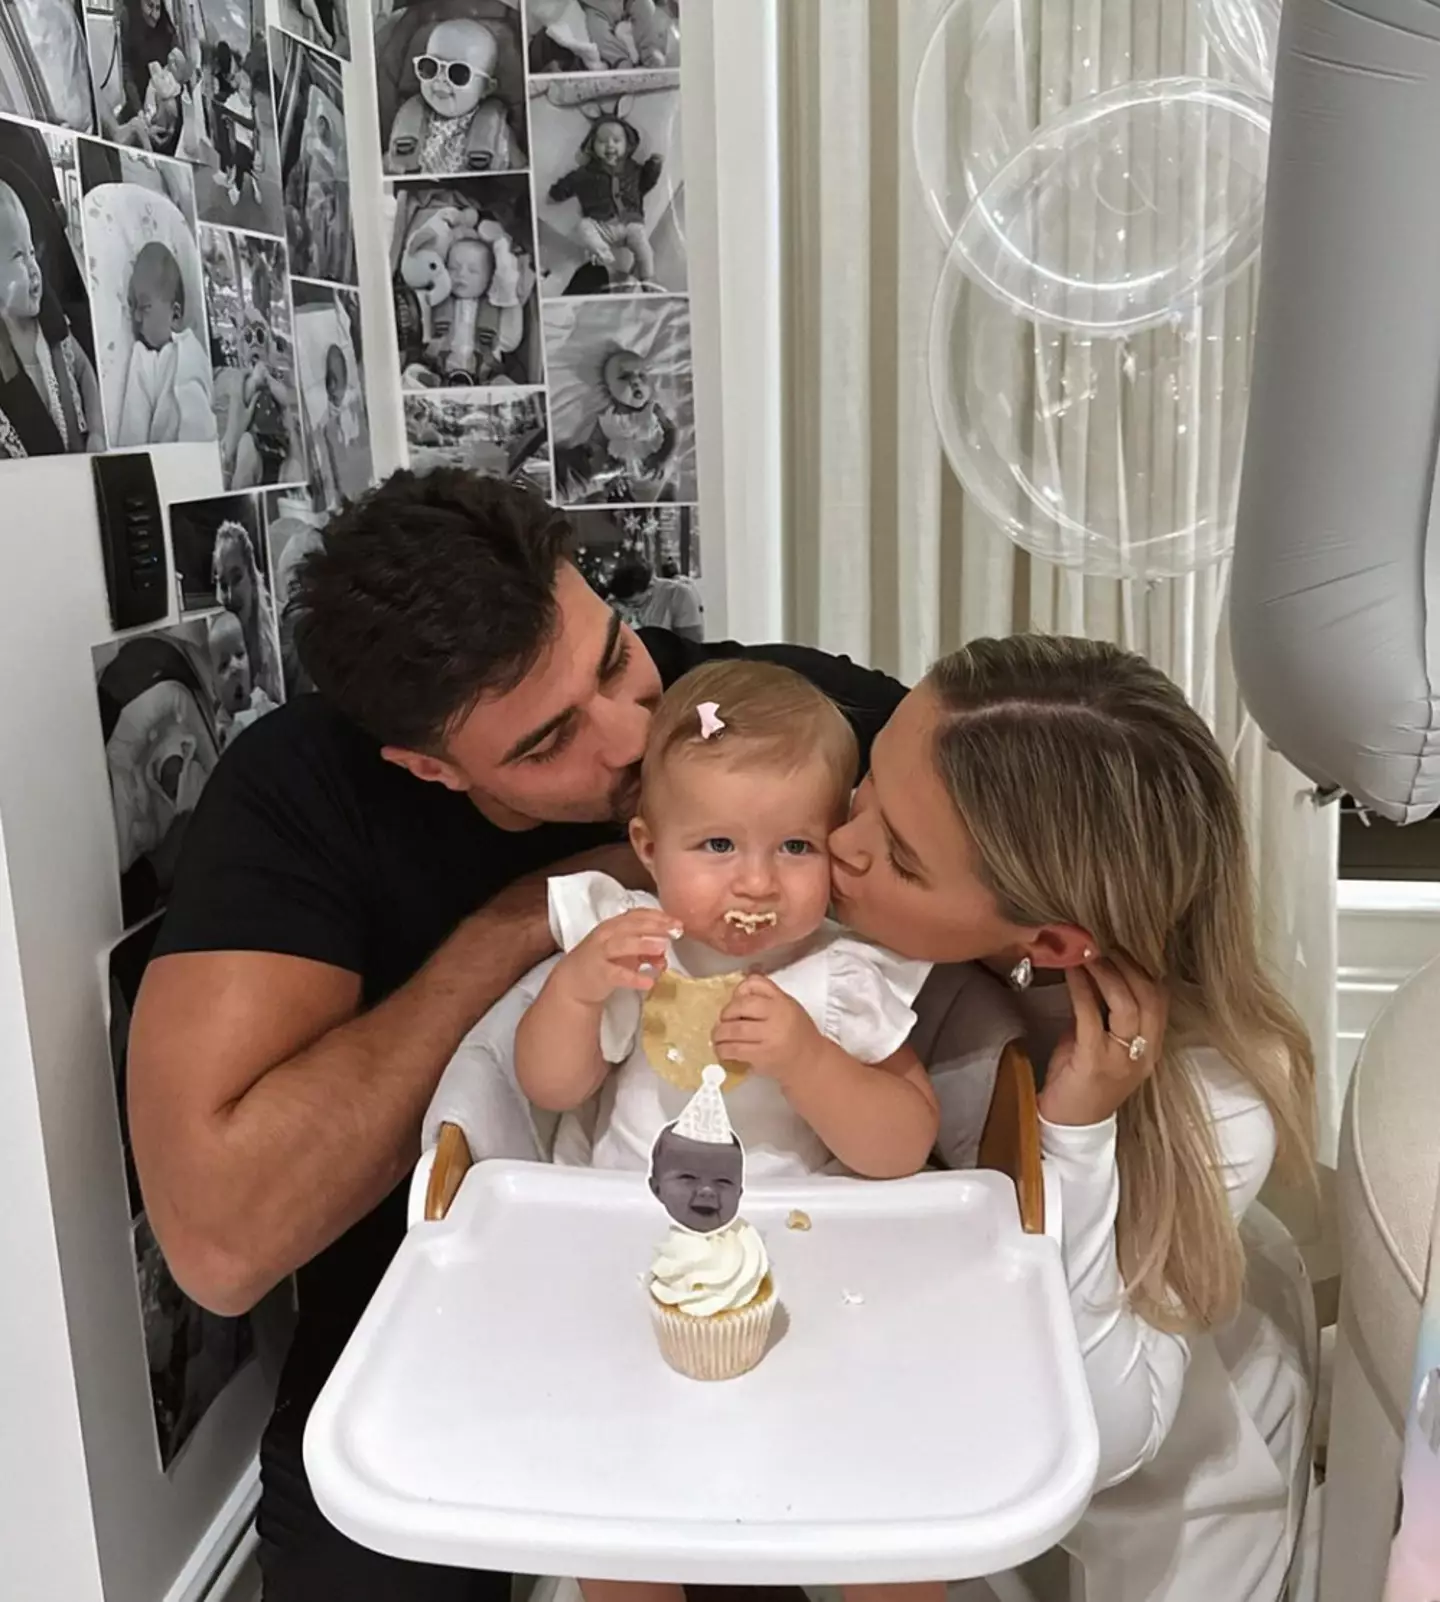 It's been a big week for Tommy Fury, with Bambi also celebrating her first birthday.